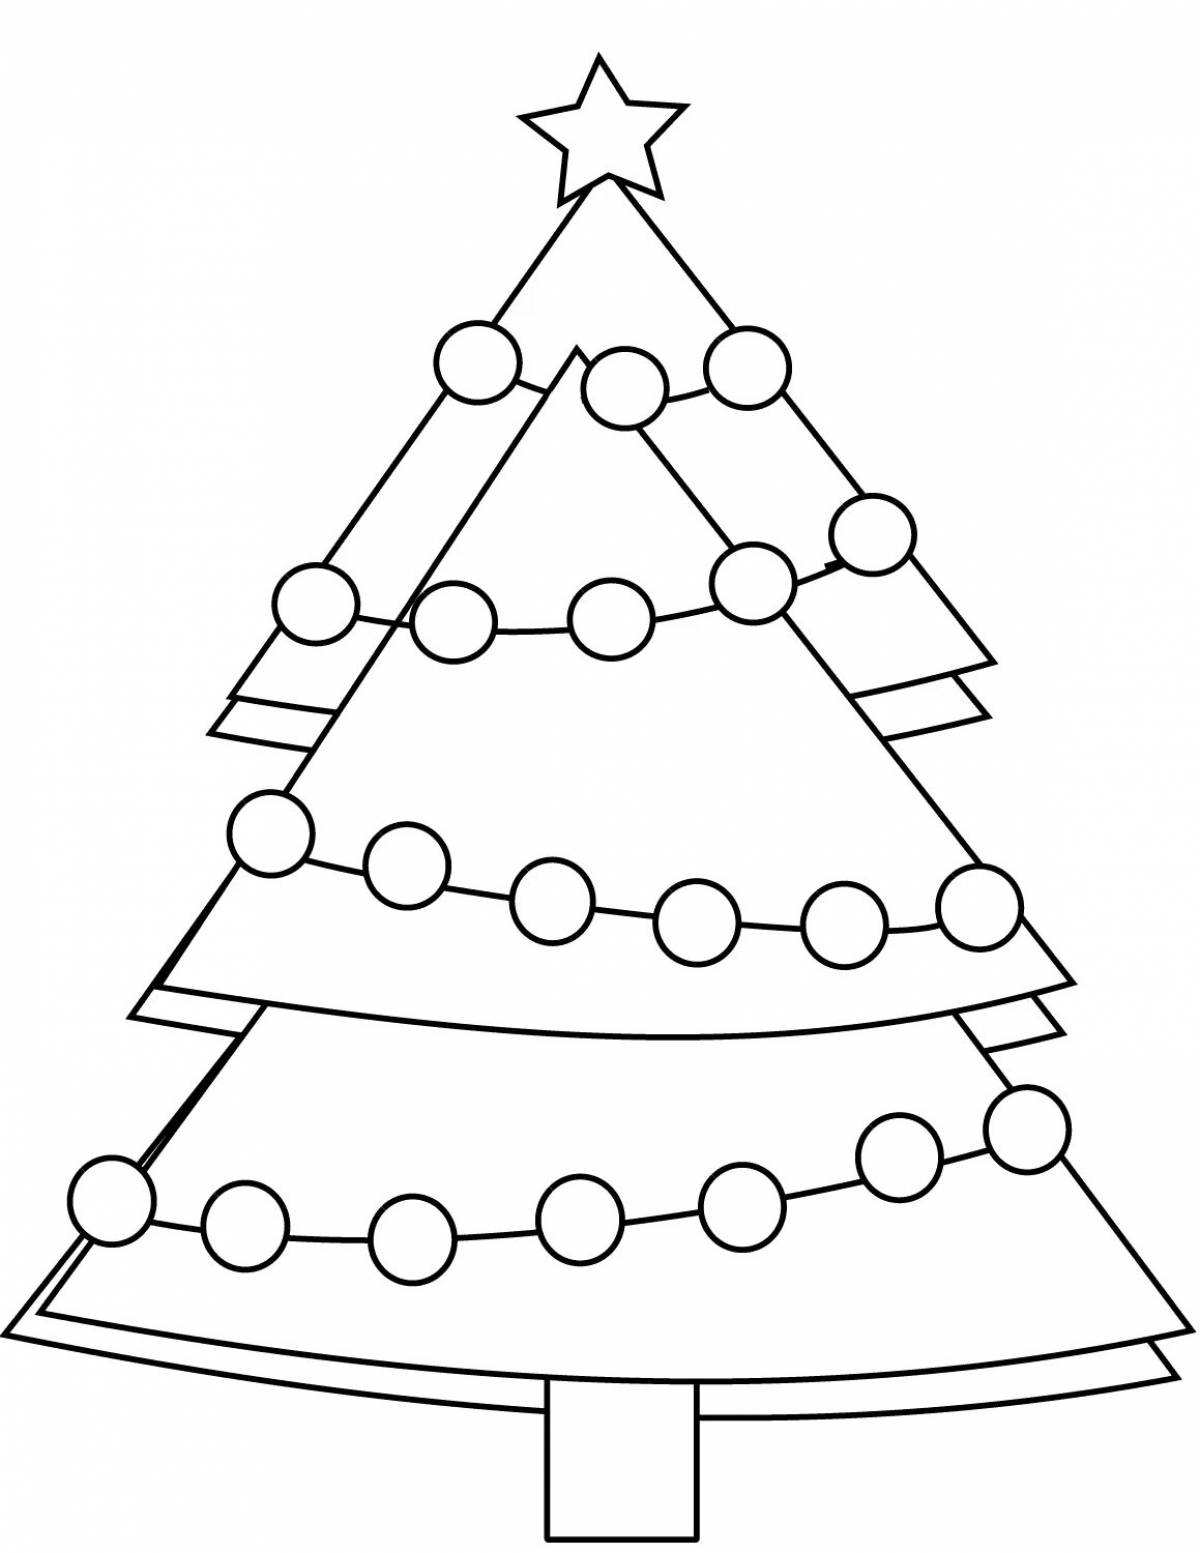 Christmas tree with balls for children #7